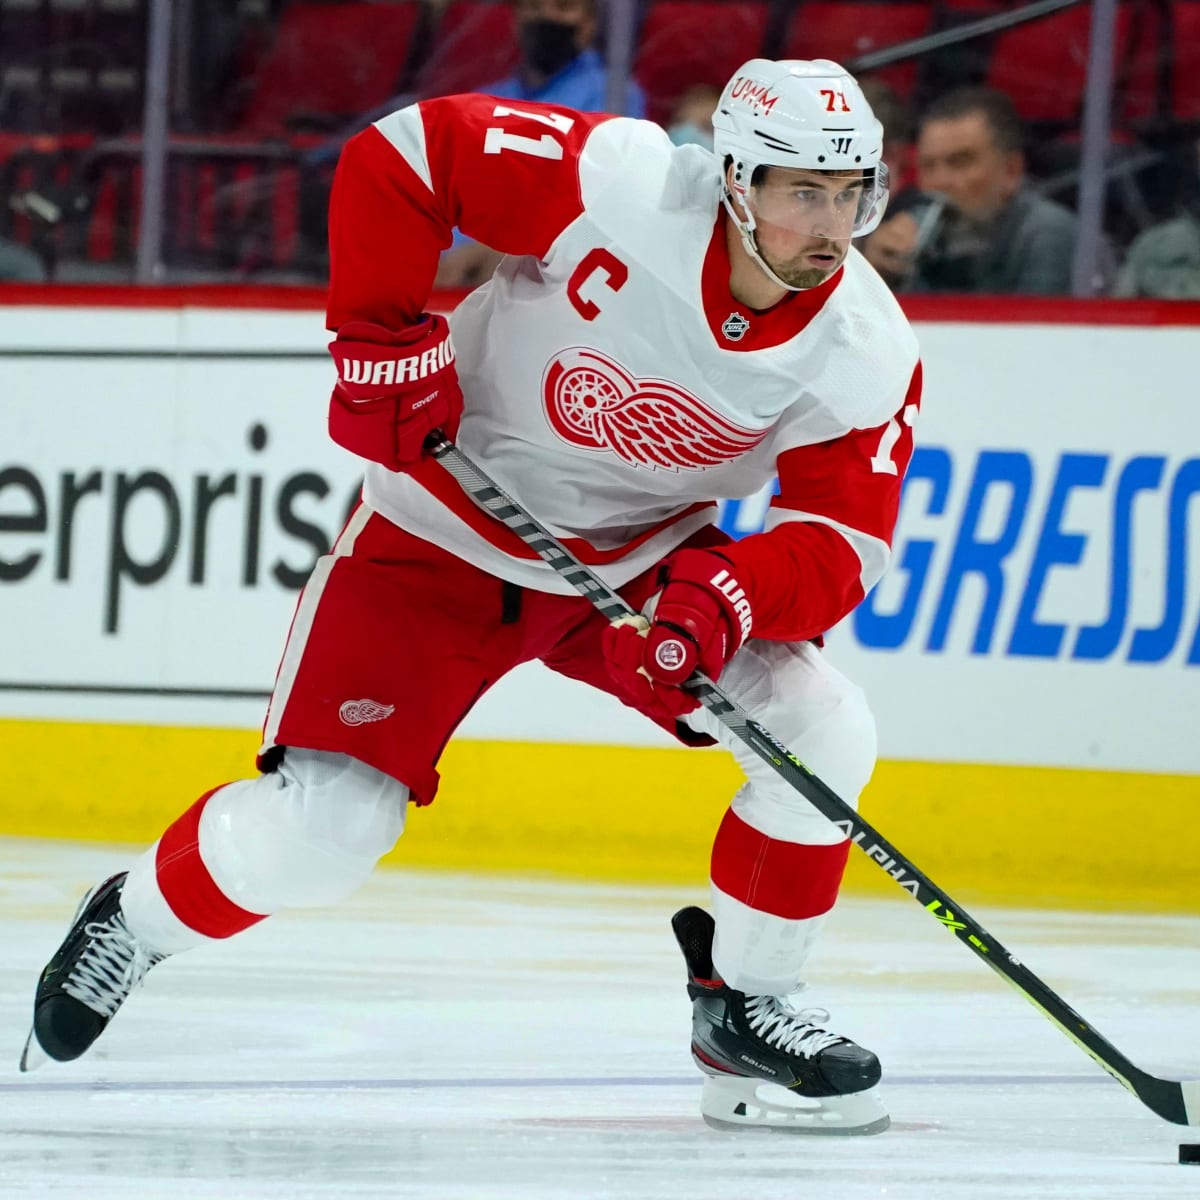 Dylan Larkin Re-Signs With the Detroit Red Wings